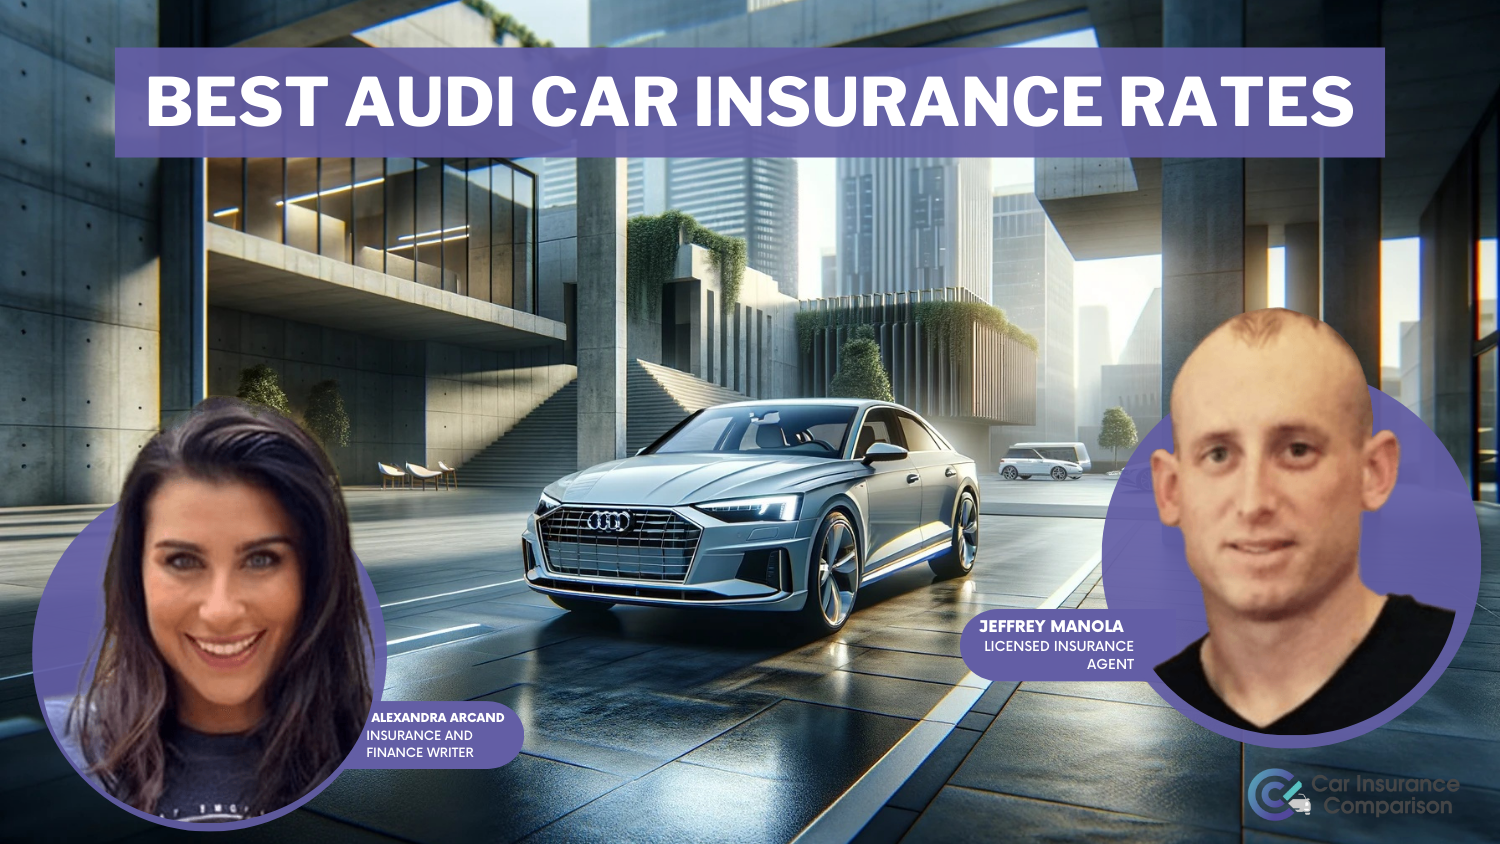 Best Audi Car Insurance Rates: State Farm, USAA, and Geico